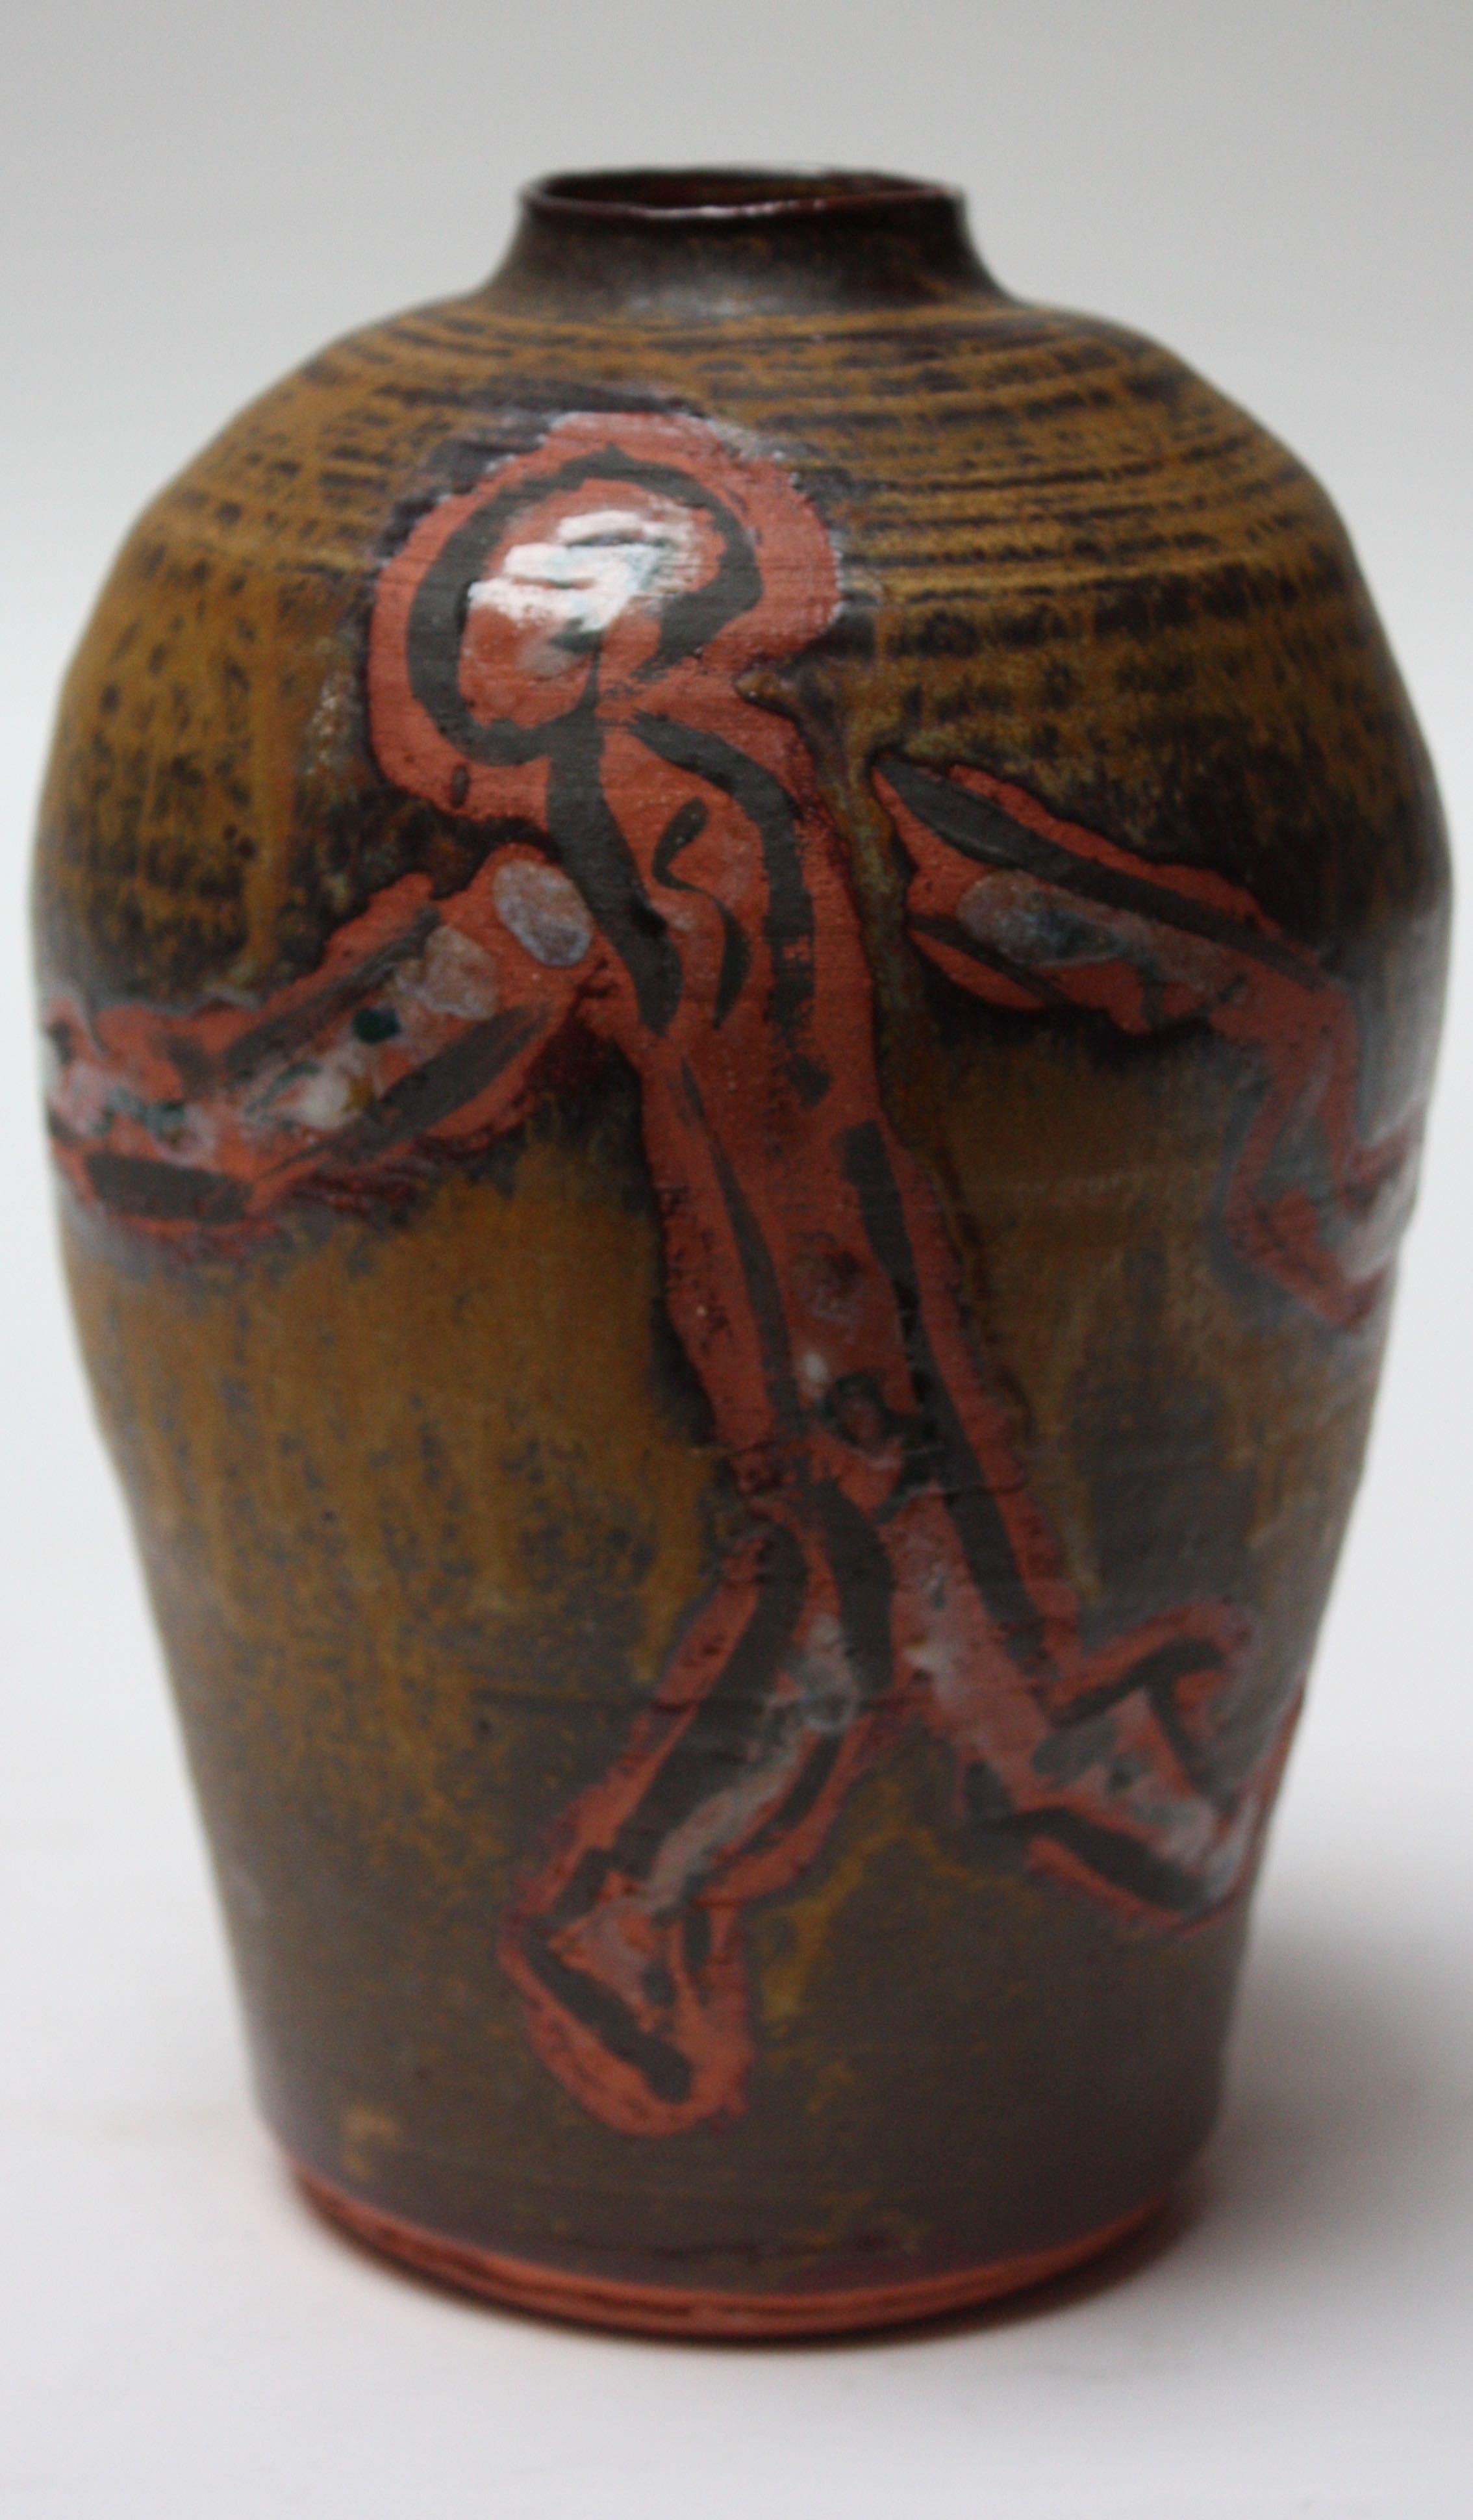 American Studio Pottery work featuring a hand painted Primitive figure motif on terracotta, circa 1970s. Attractive combinations of colors; the ochre and brown background contrast nicely with the terracotta, red, and green details of the figures